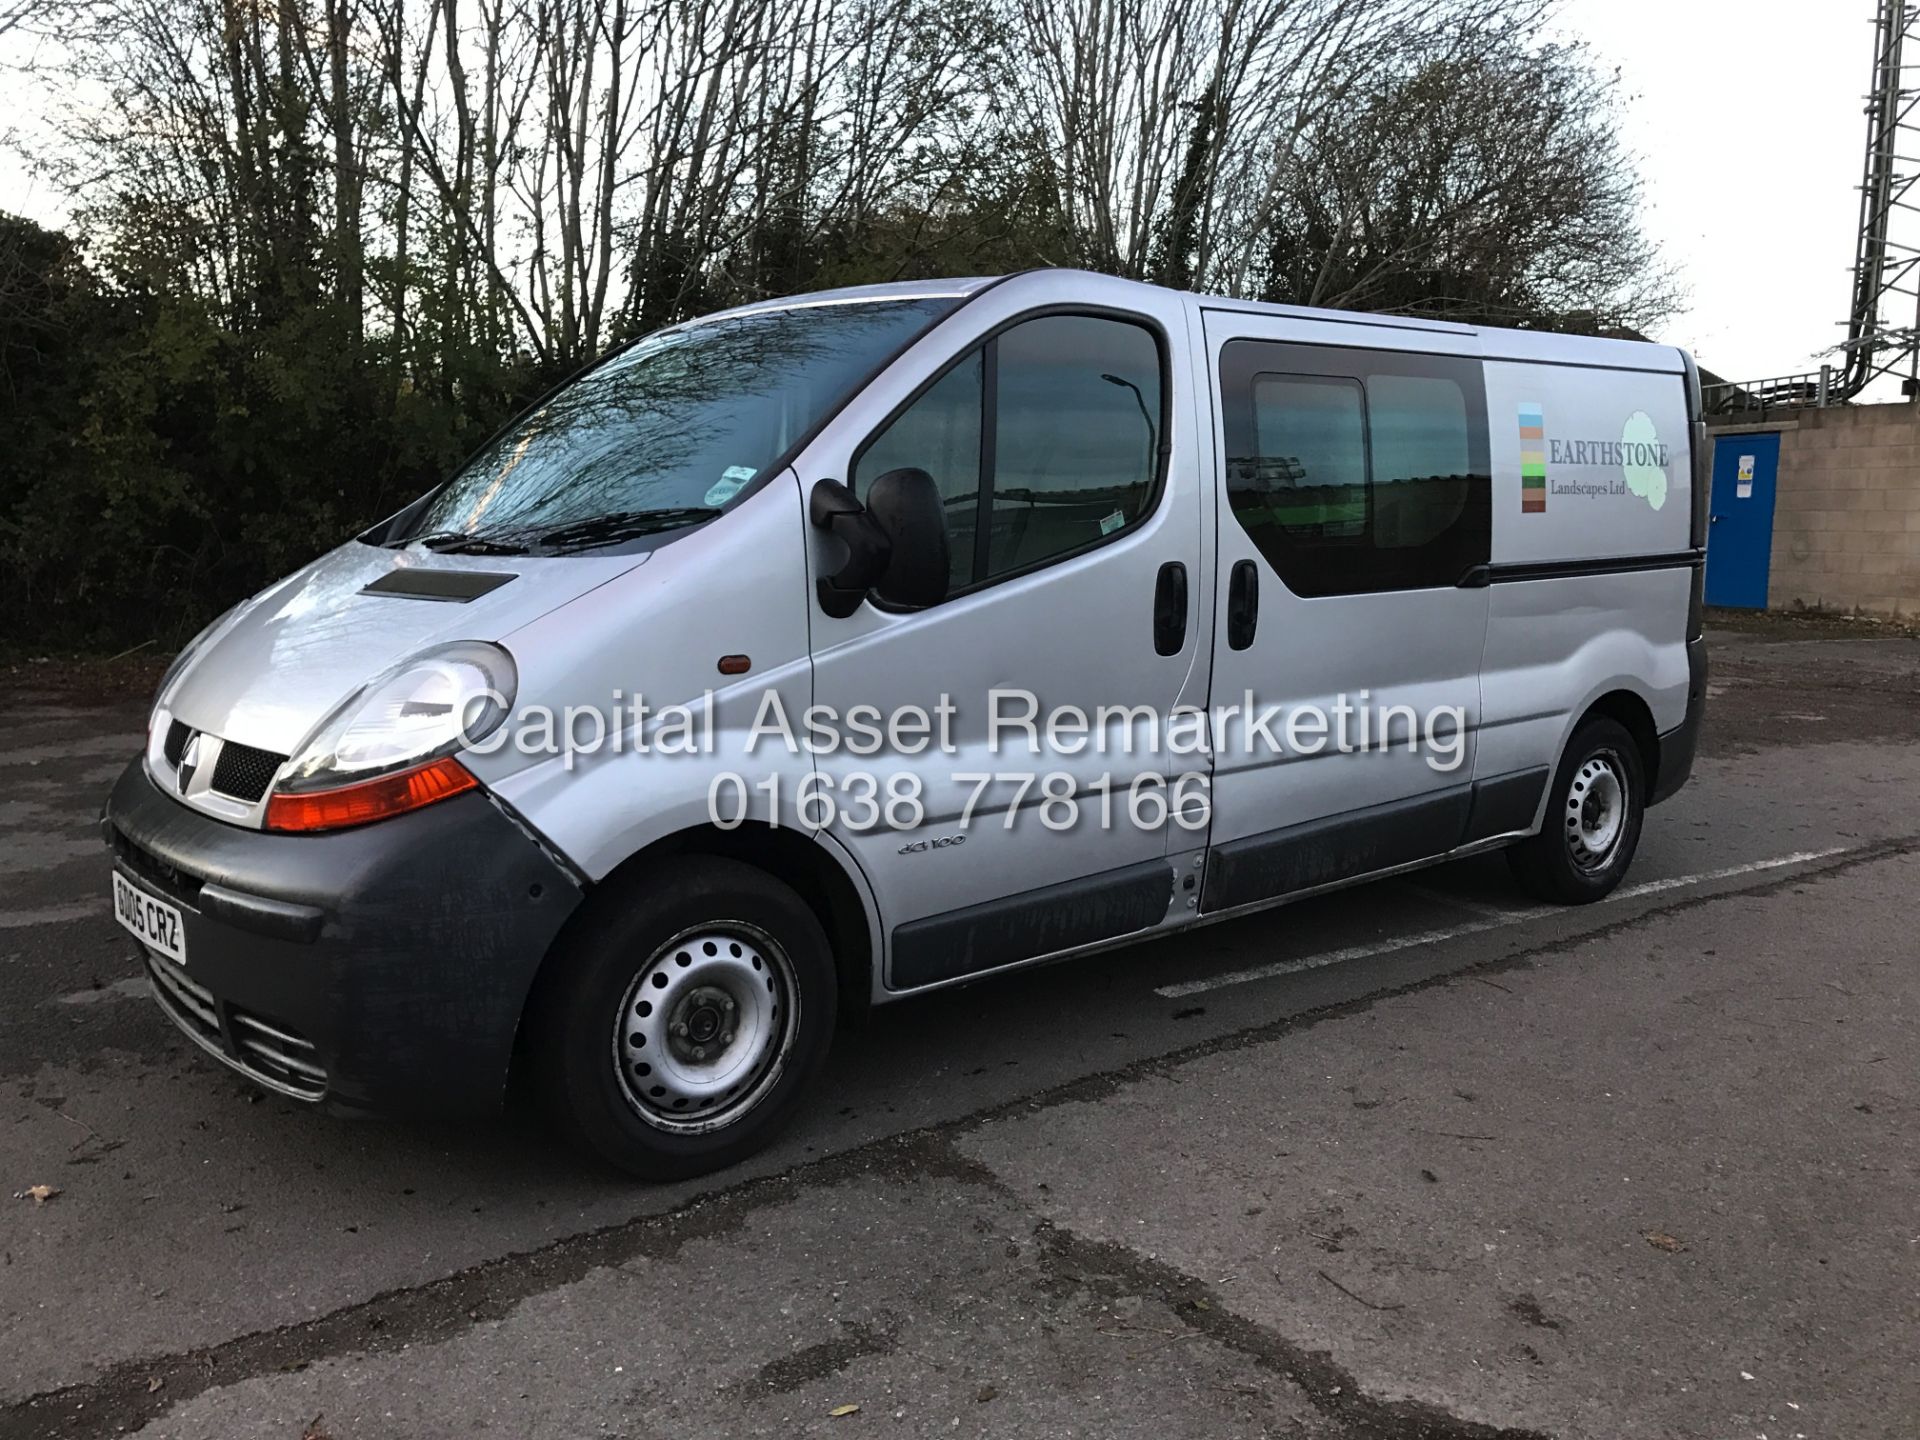 On Sale RENAULT TRAFIC 1.9DCI LONG WHEEL BASE DUELINER 6 SEATER - 05 REG - SILVER - AIR CON - WOW!!!